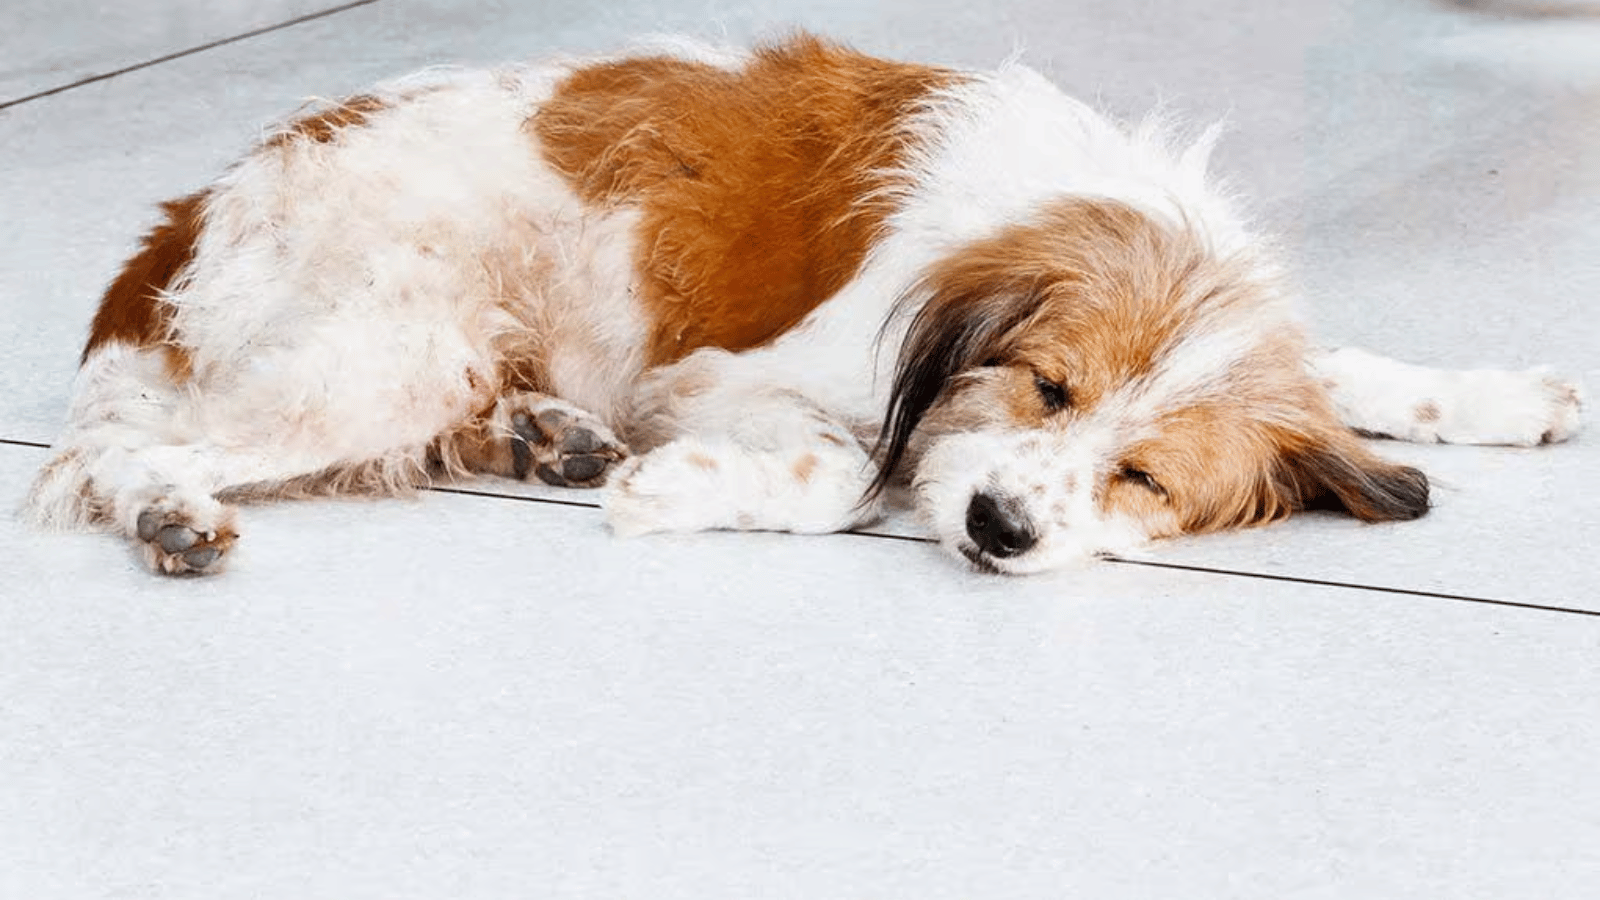 What Vitamin Deficiency Causes Hair Loss in Dogs